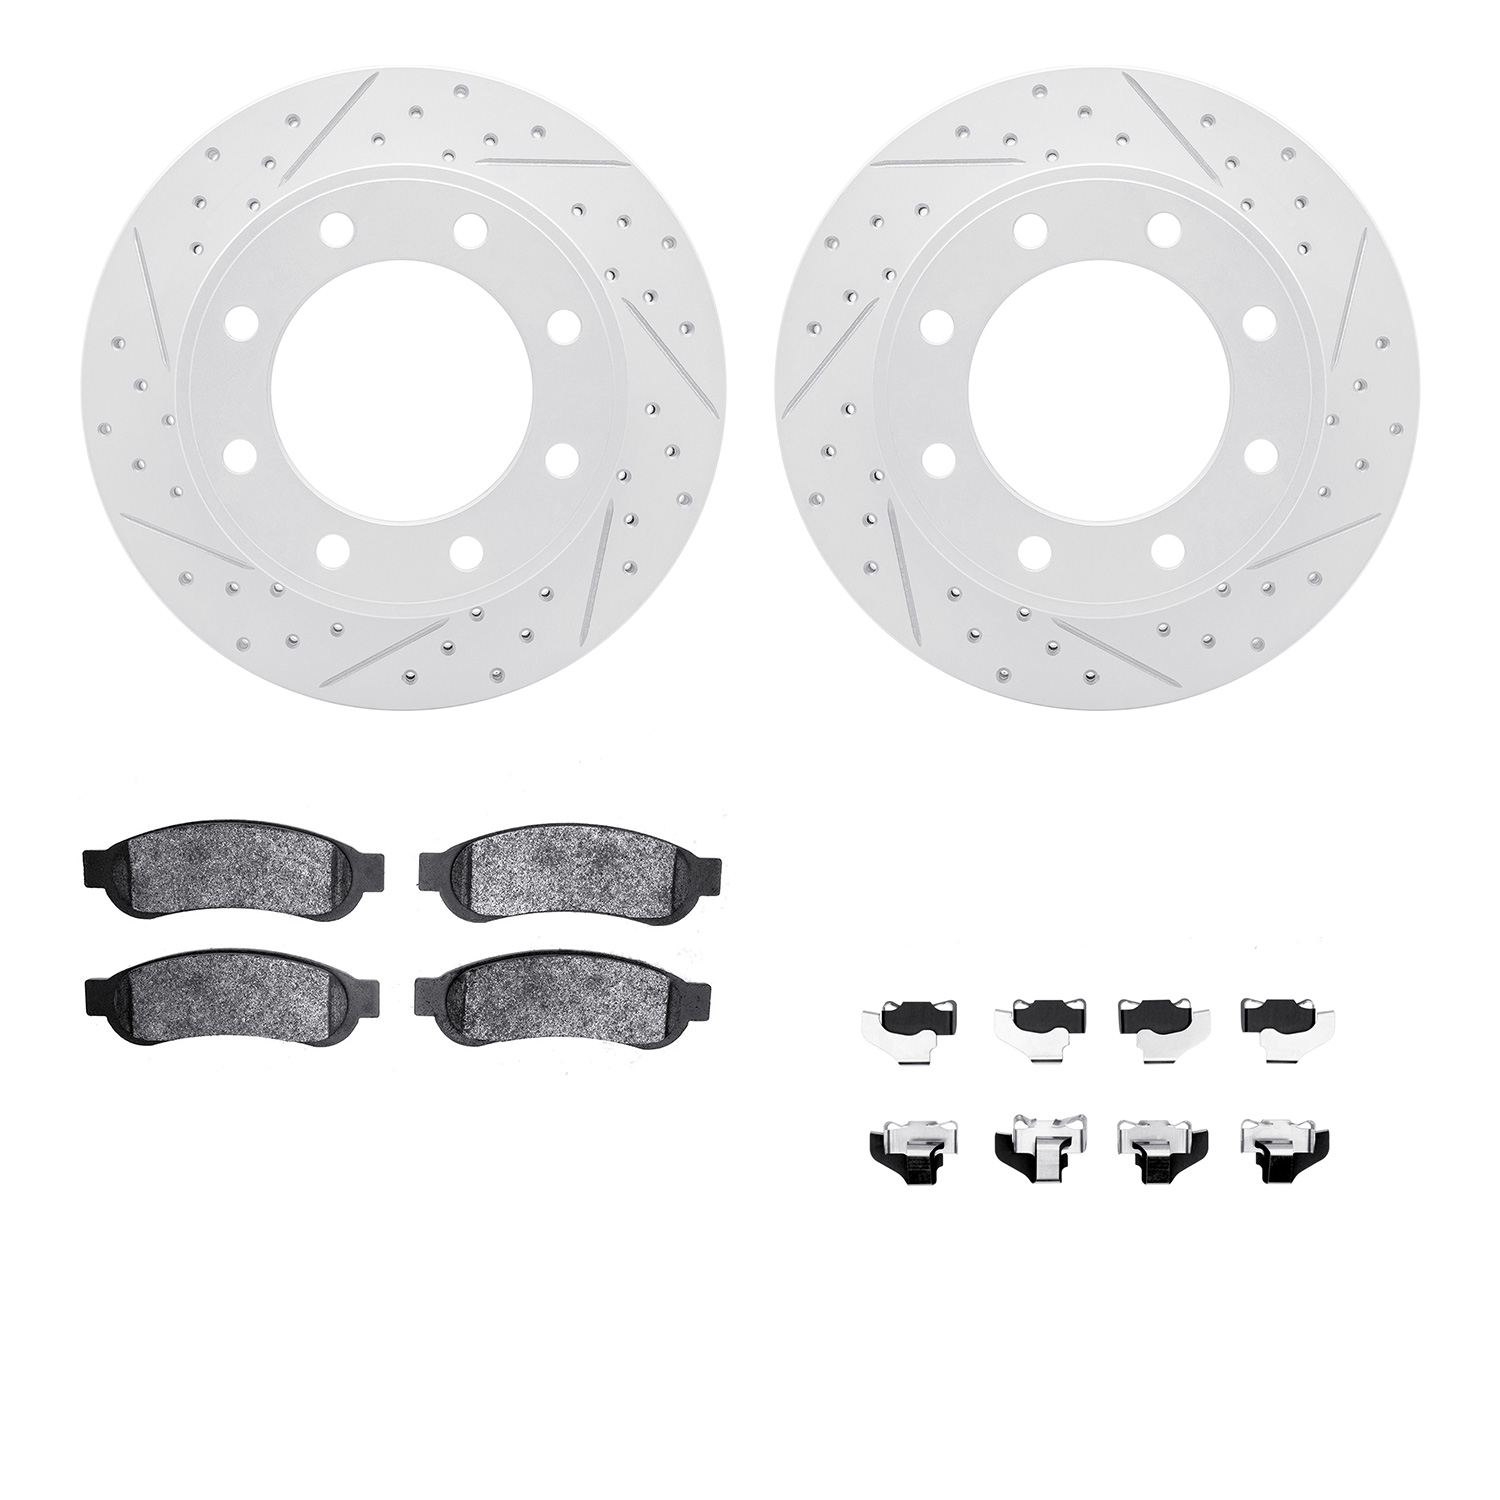 2212-99156 Geoperformance Drilled/Slotted Rotors w/Heavy-Duty Pads Kit & Hardware, 2010-2012 Ford/Lincoln/Mercury/Mazda, Positio